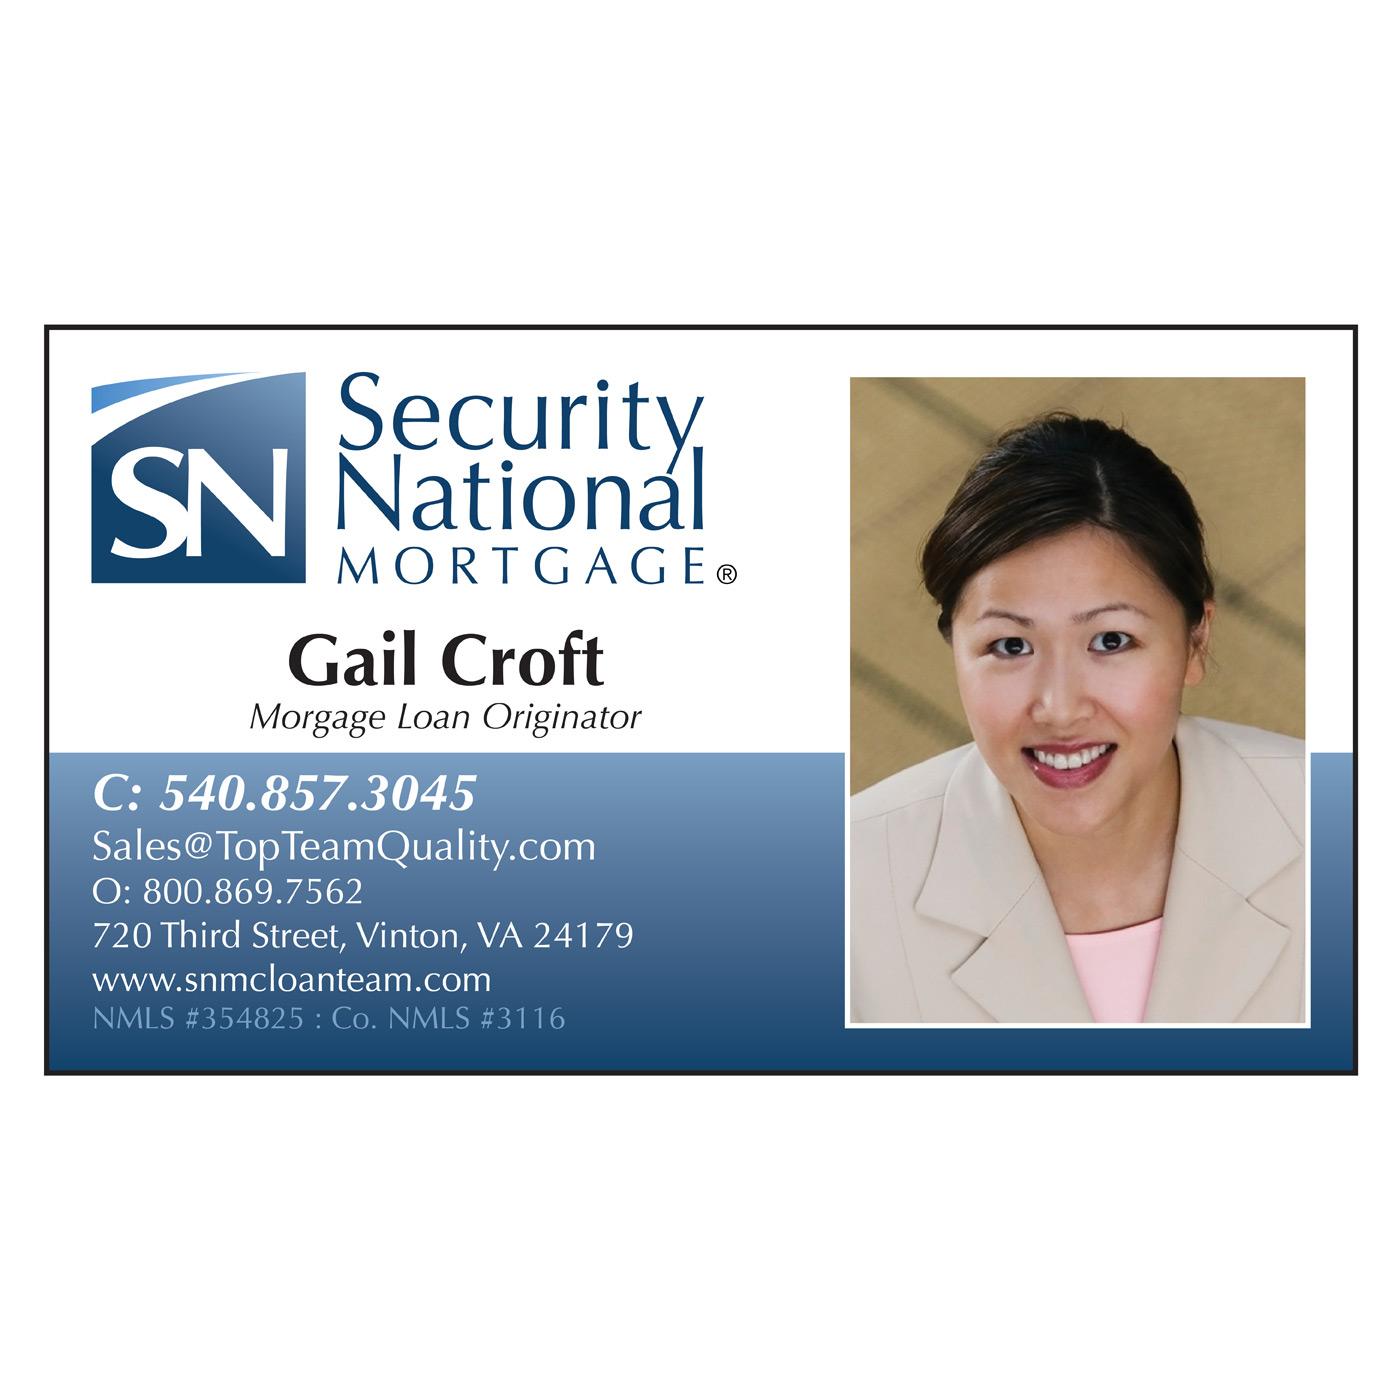 Security National Mortgage Card